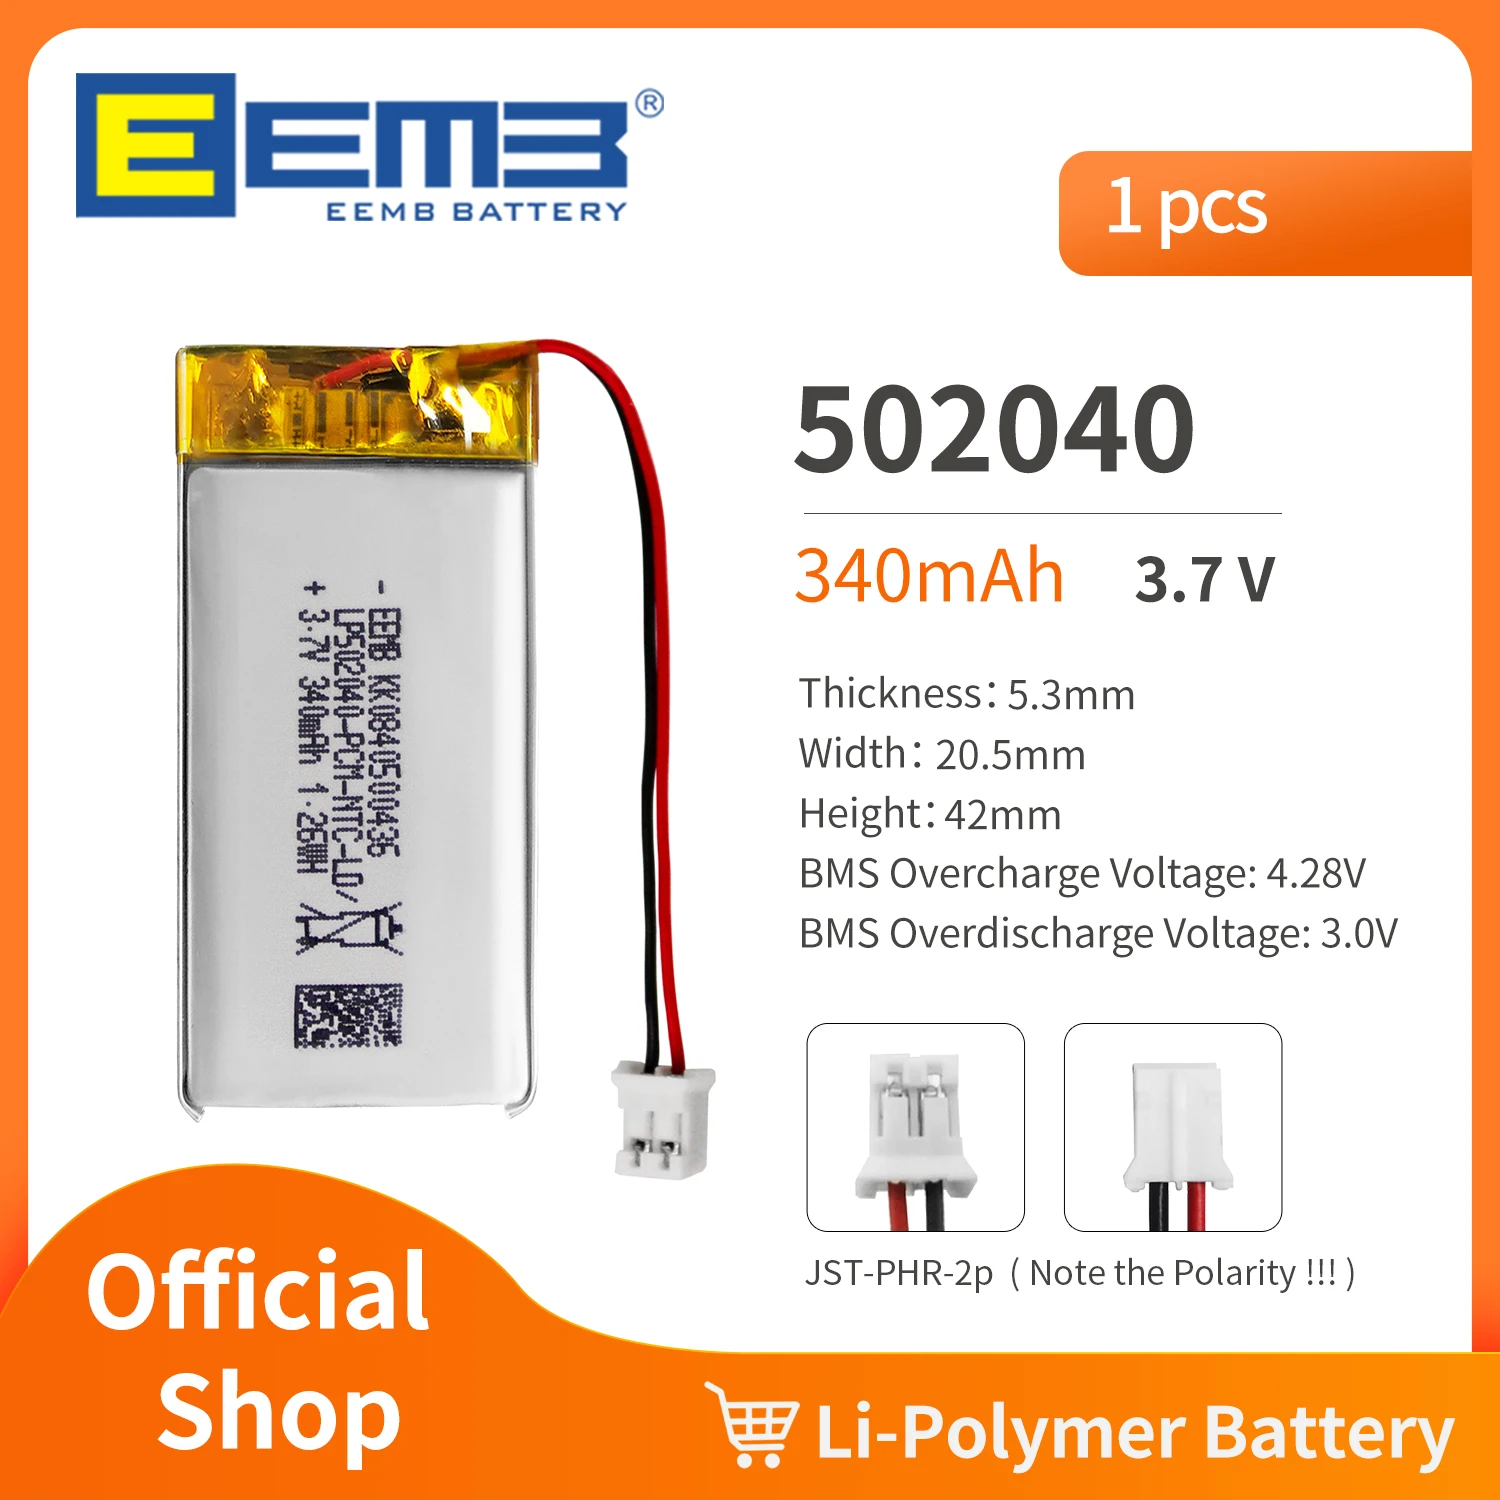 EEMB 502040 3.7V Battery 340mAh Rechargeable Lithium Polymer Battery Pack For Dashcam,Flashlight,Bluetooth Speaker, GPS,Camera